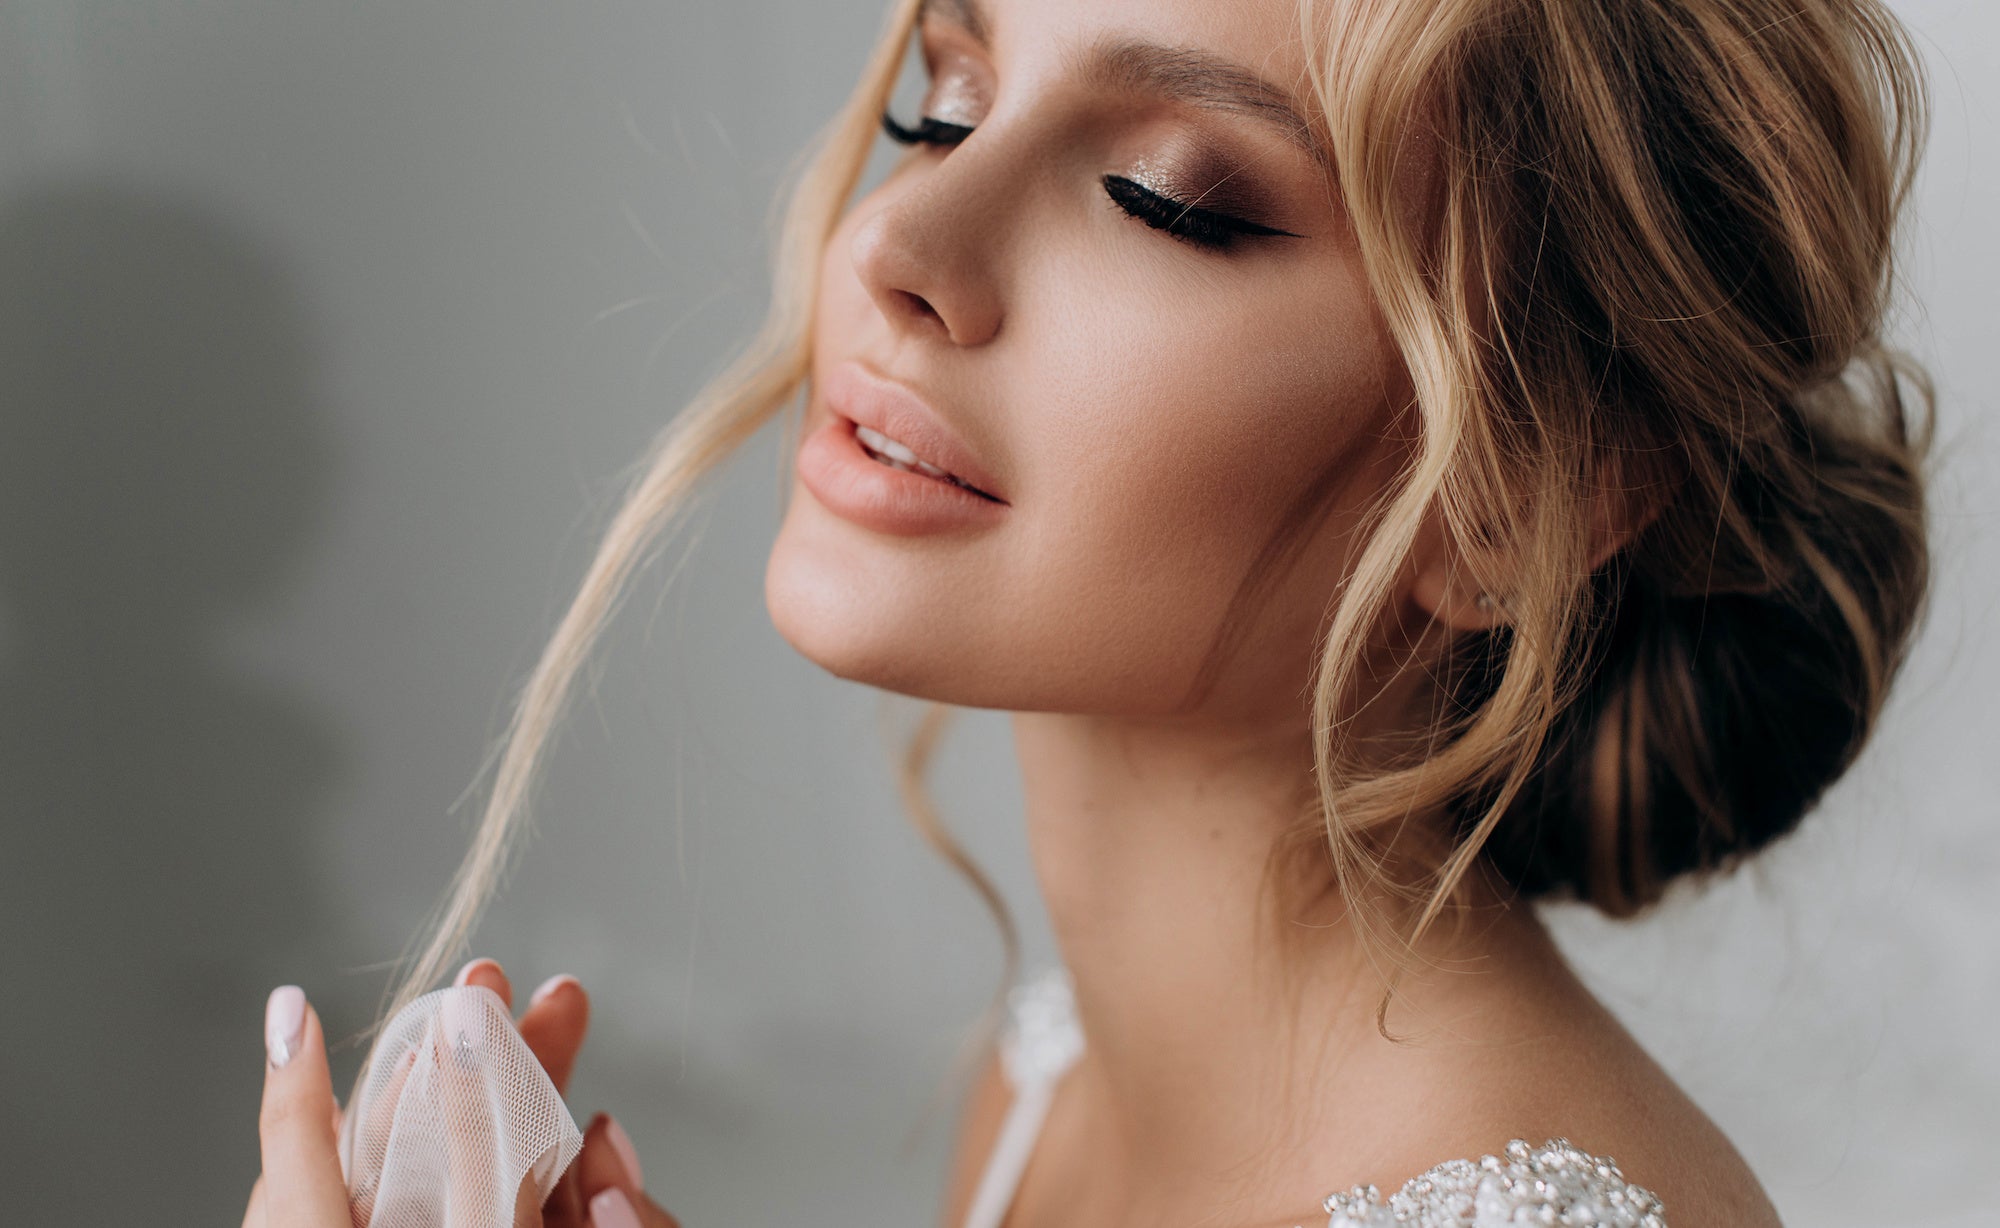 From 'I Do' to Dance Floor: Wedding Makeup Tips to Last All Day